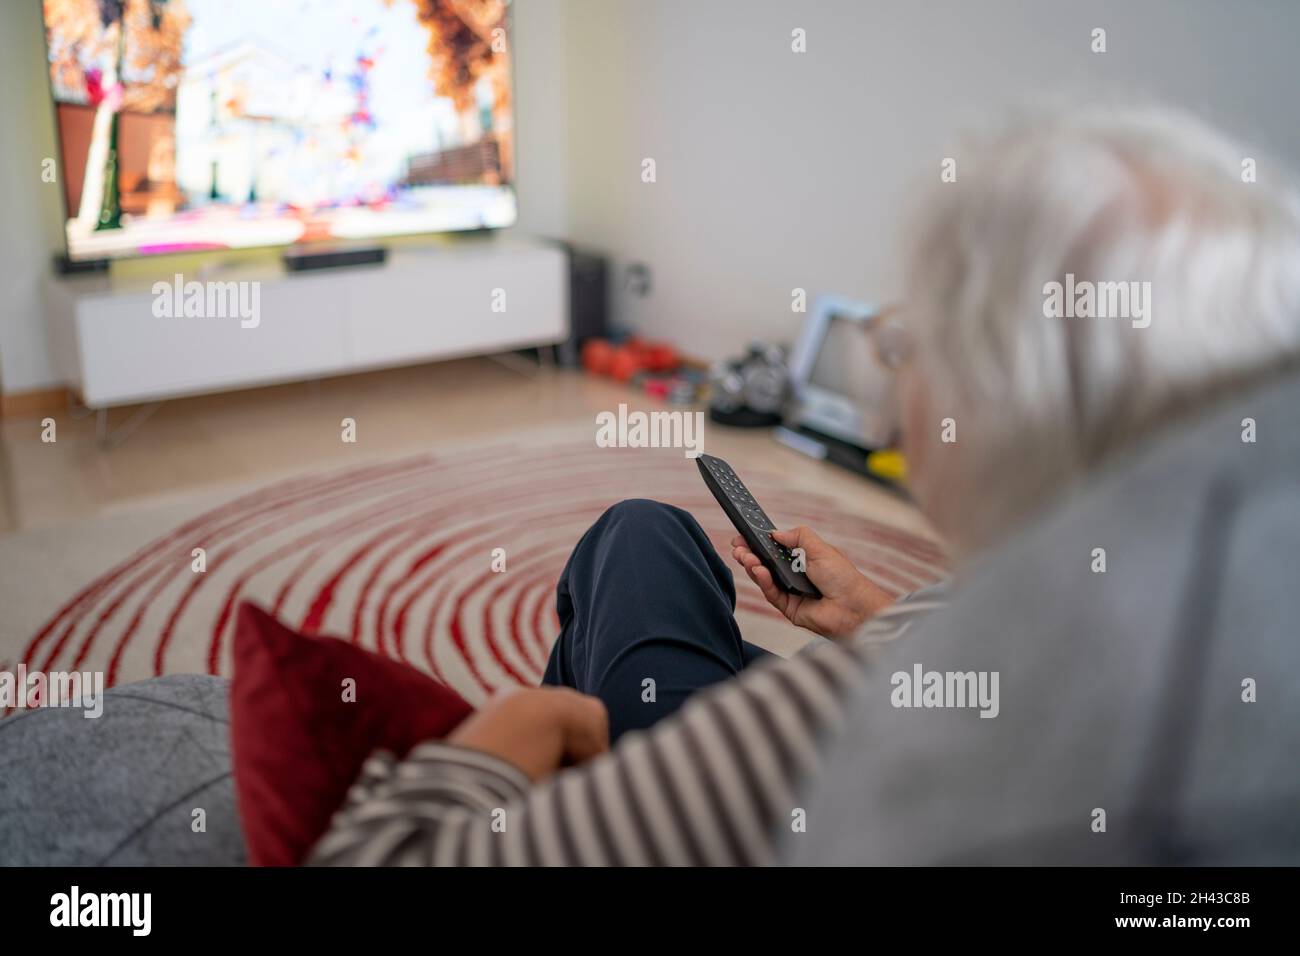 Selective focus photo of a mature woman holding the TV remote while watching television at home Stock Photo